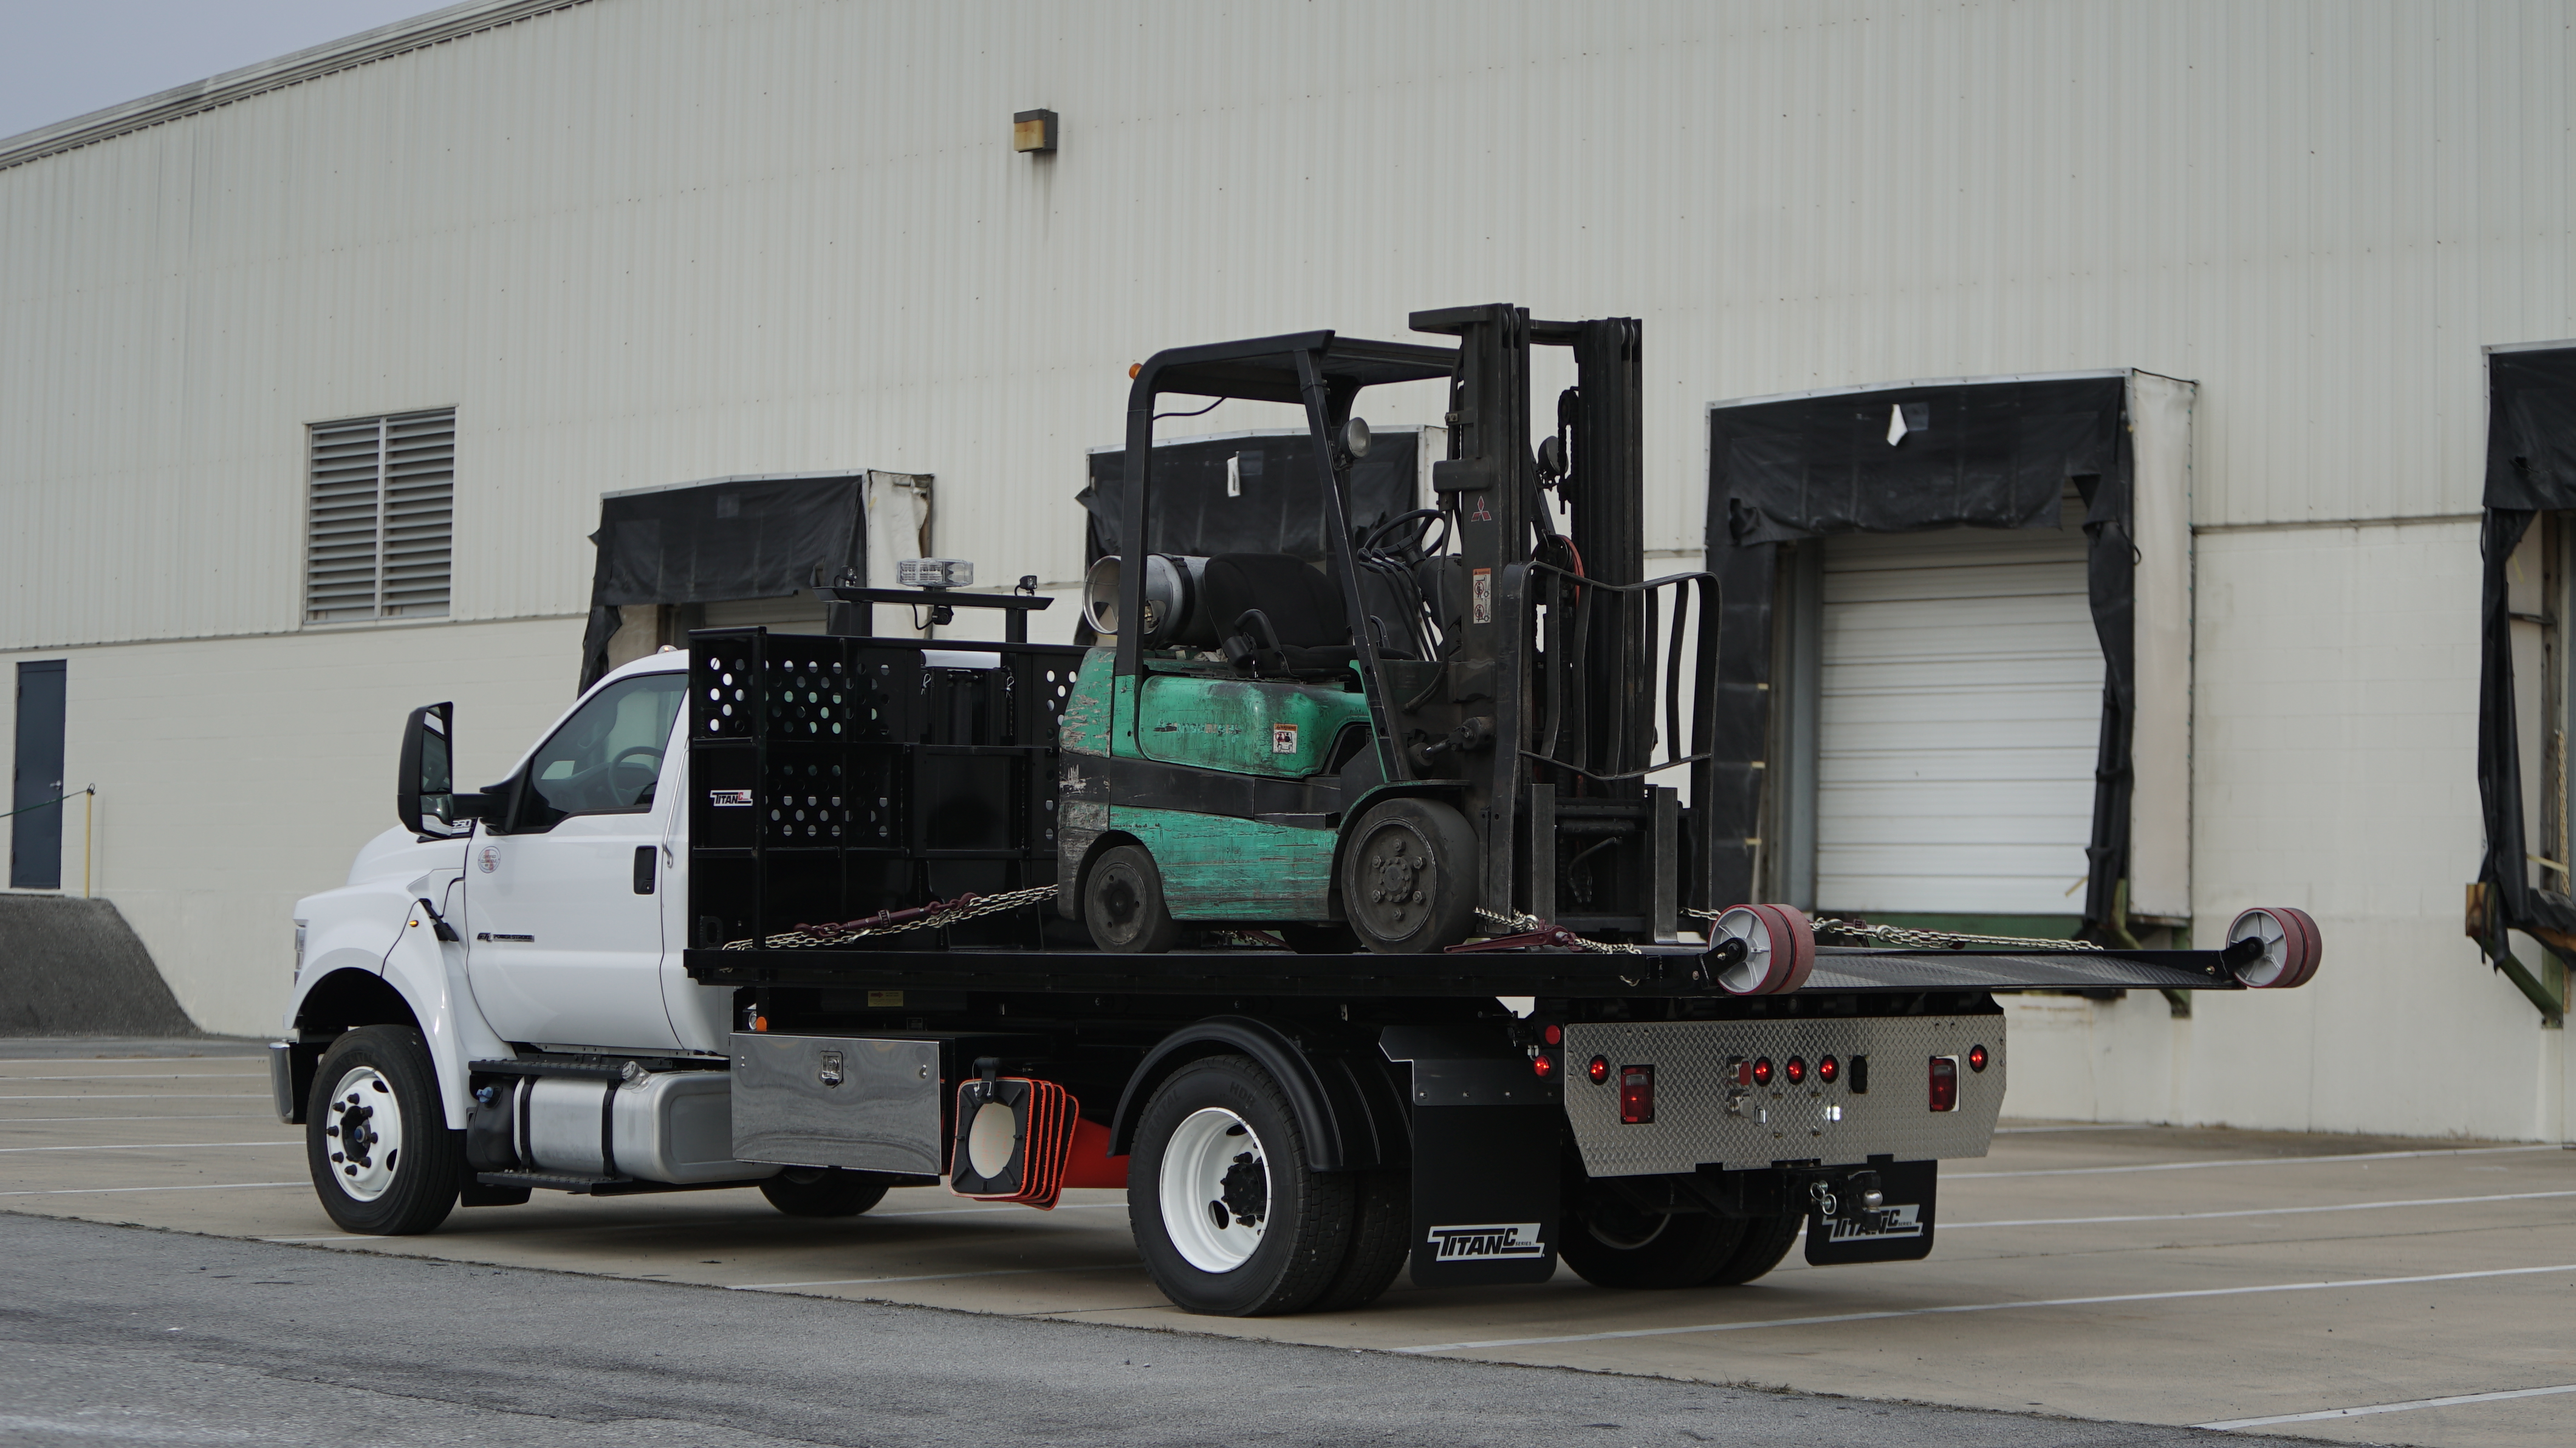 The Titan® C-Series transporting a fork truck